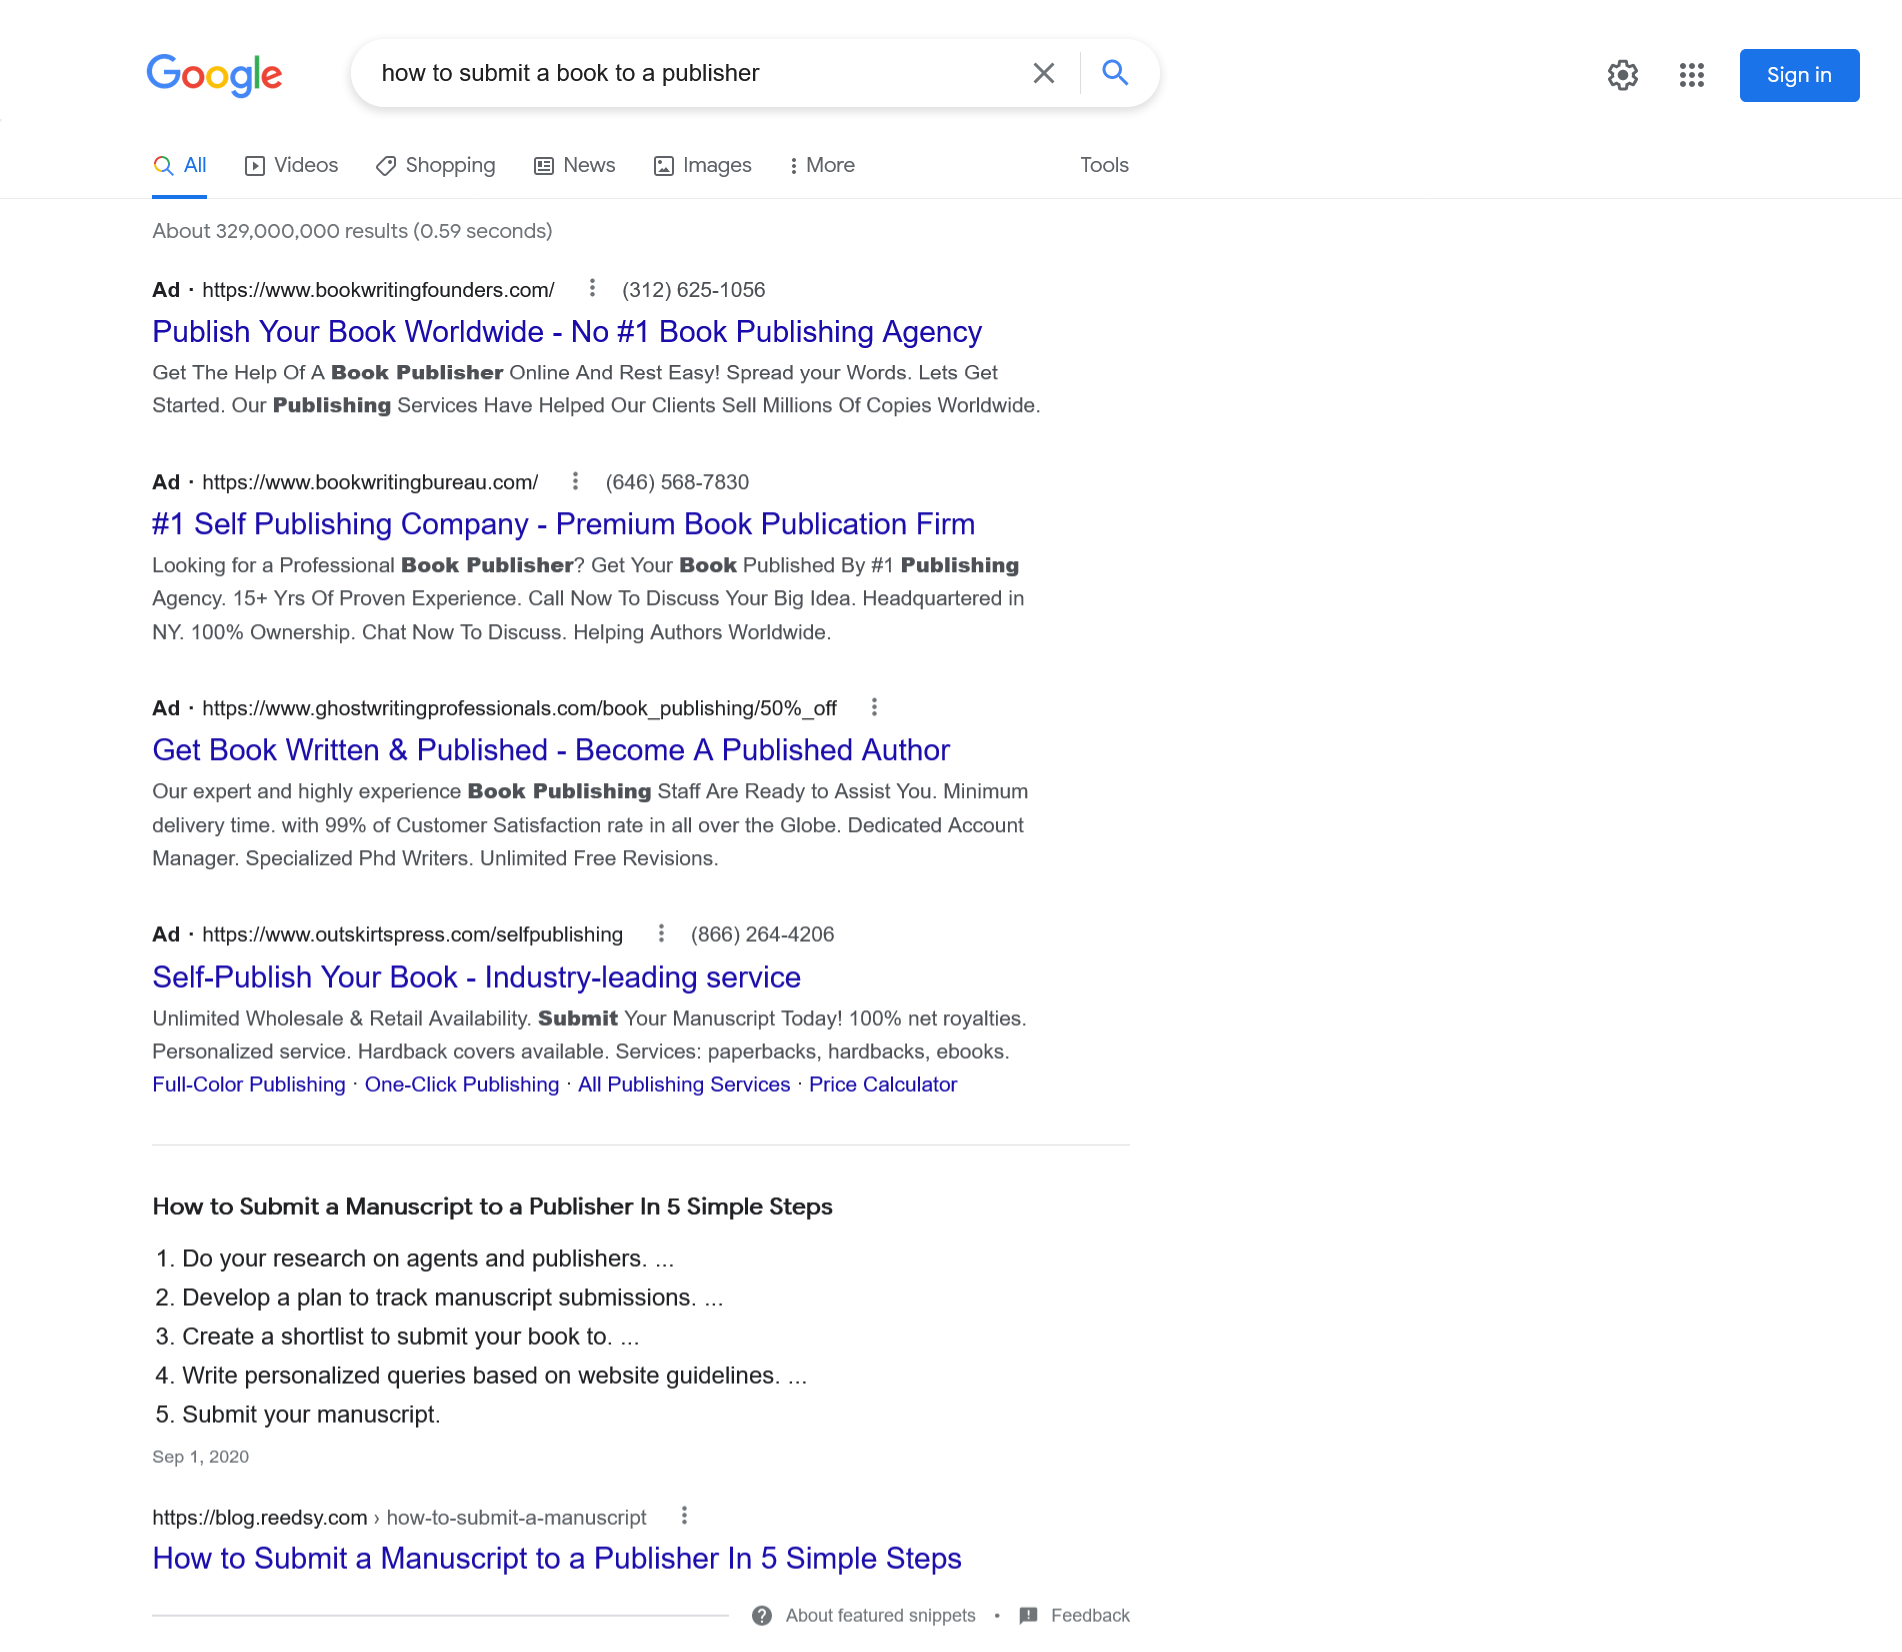 Example of Featured Snippets SERP feature